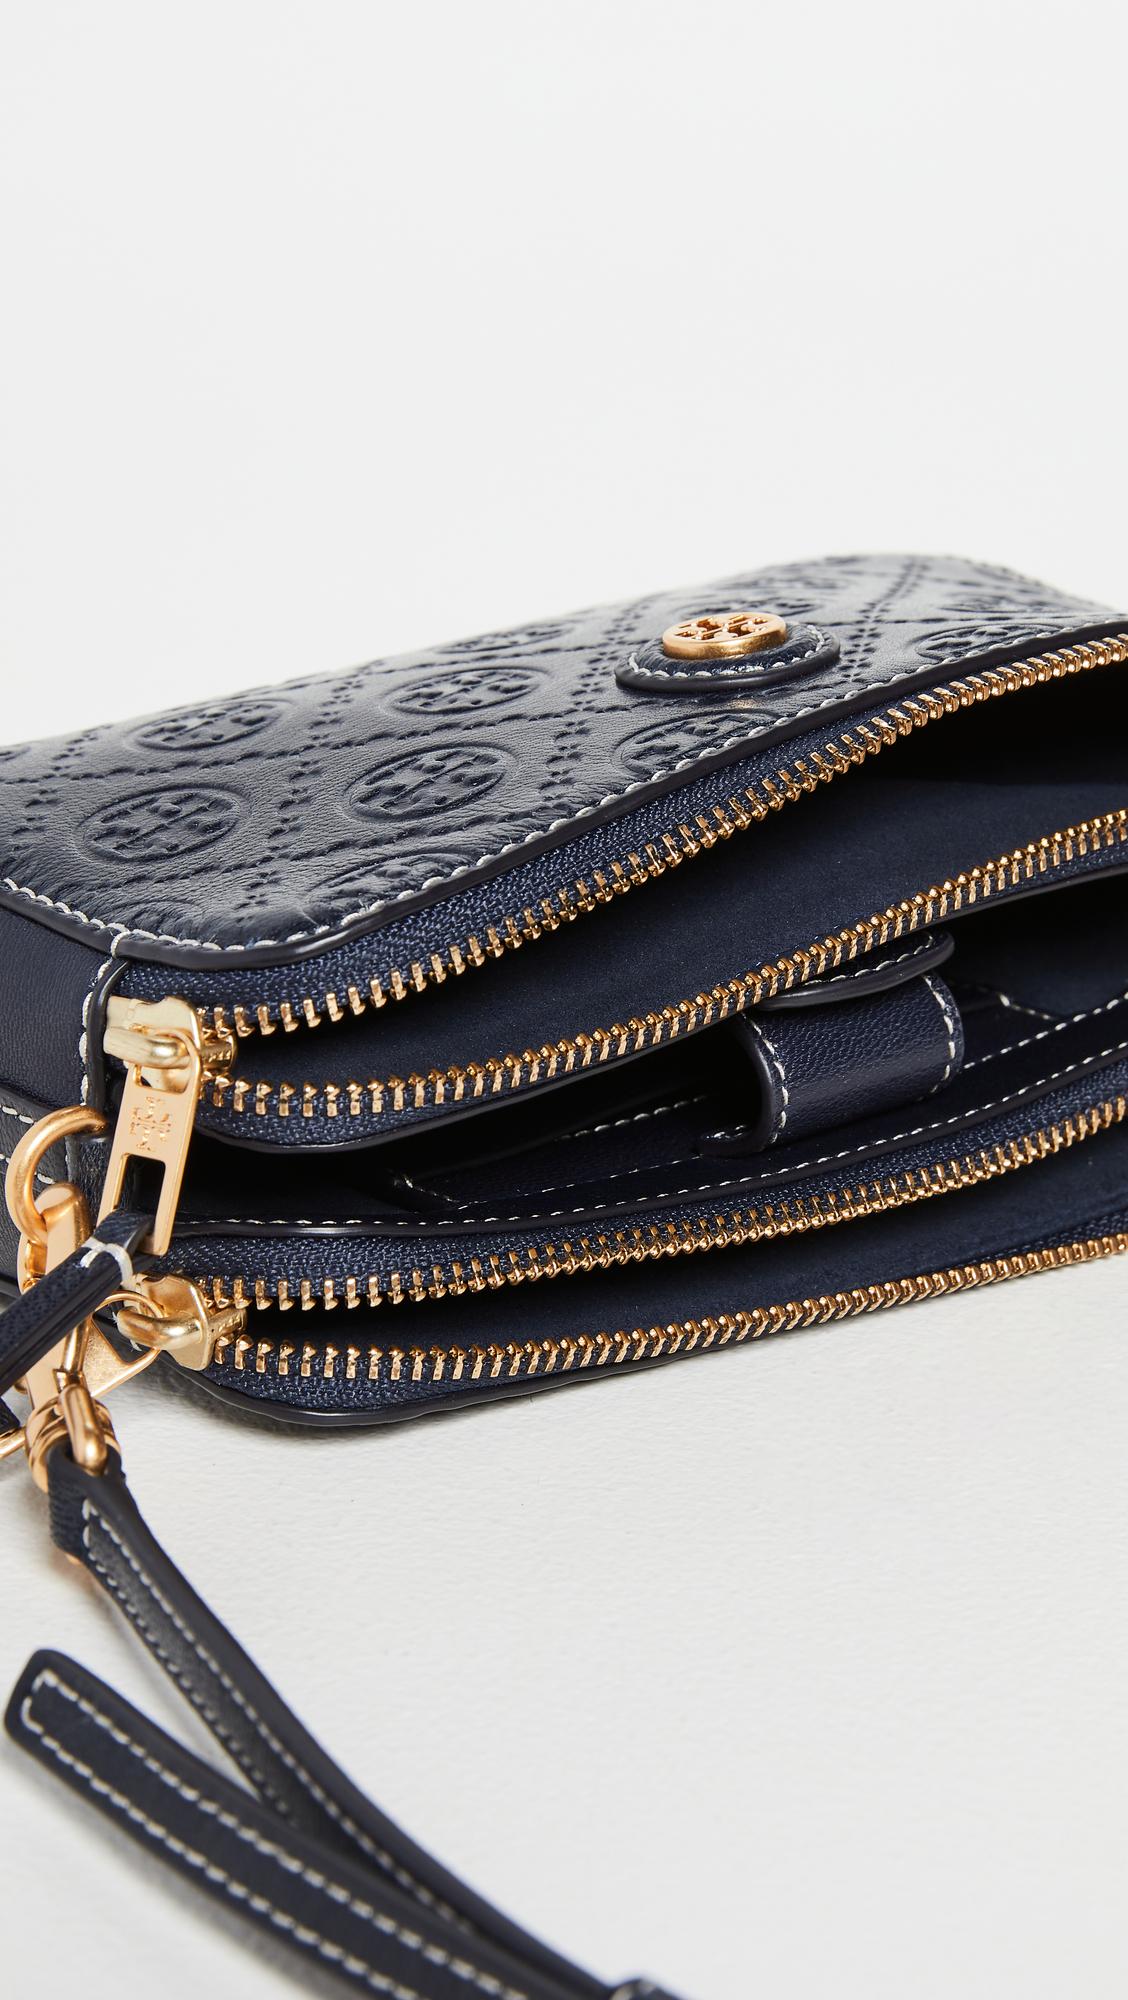 Tory Burch T Monogram Leather Double Zip Mini Bag in Blue